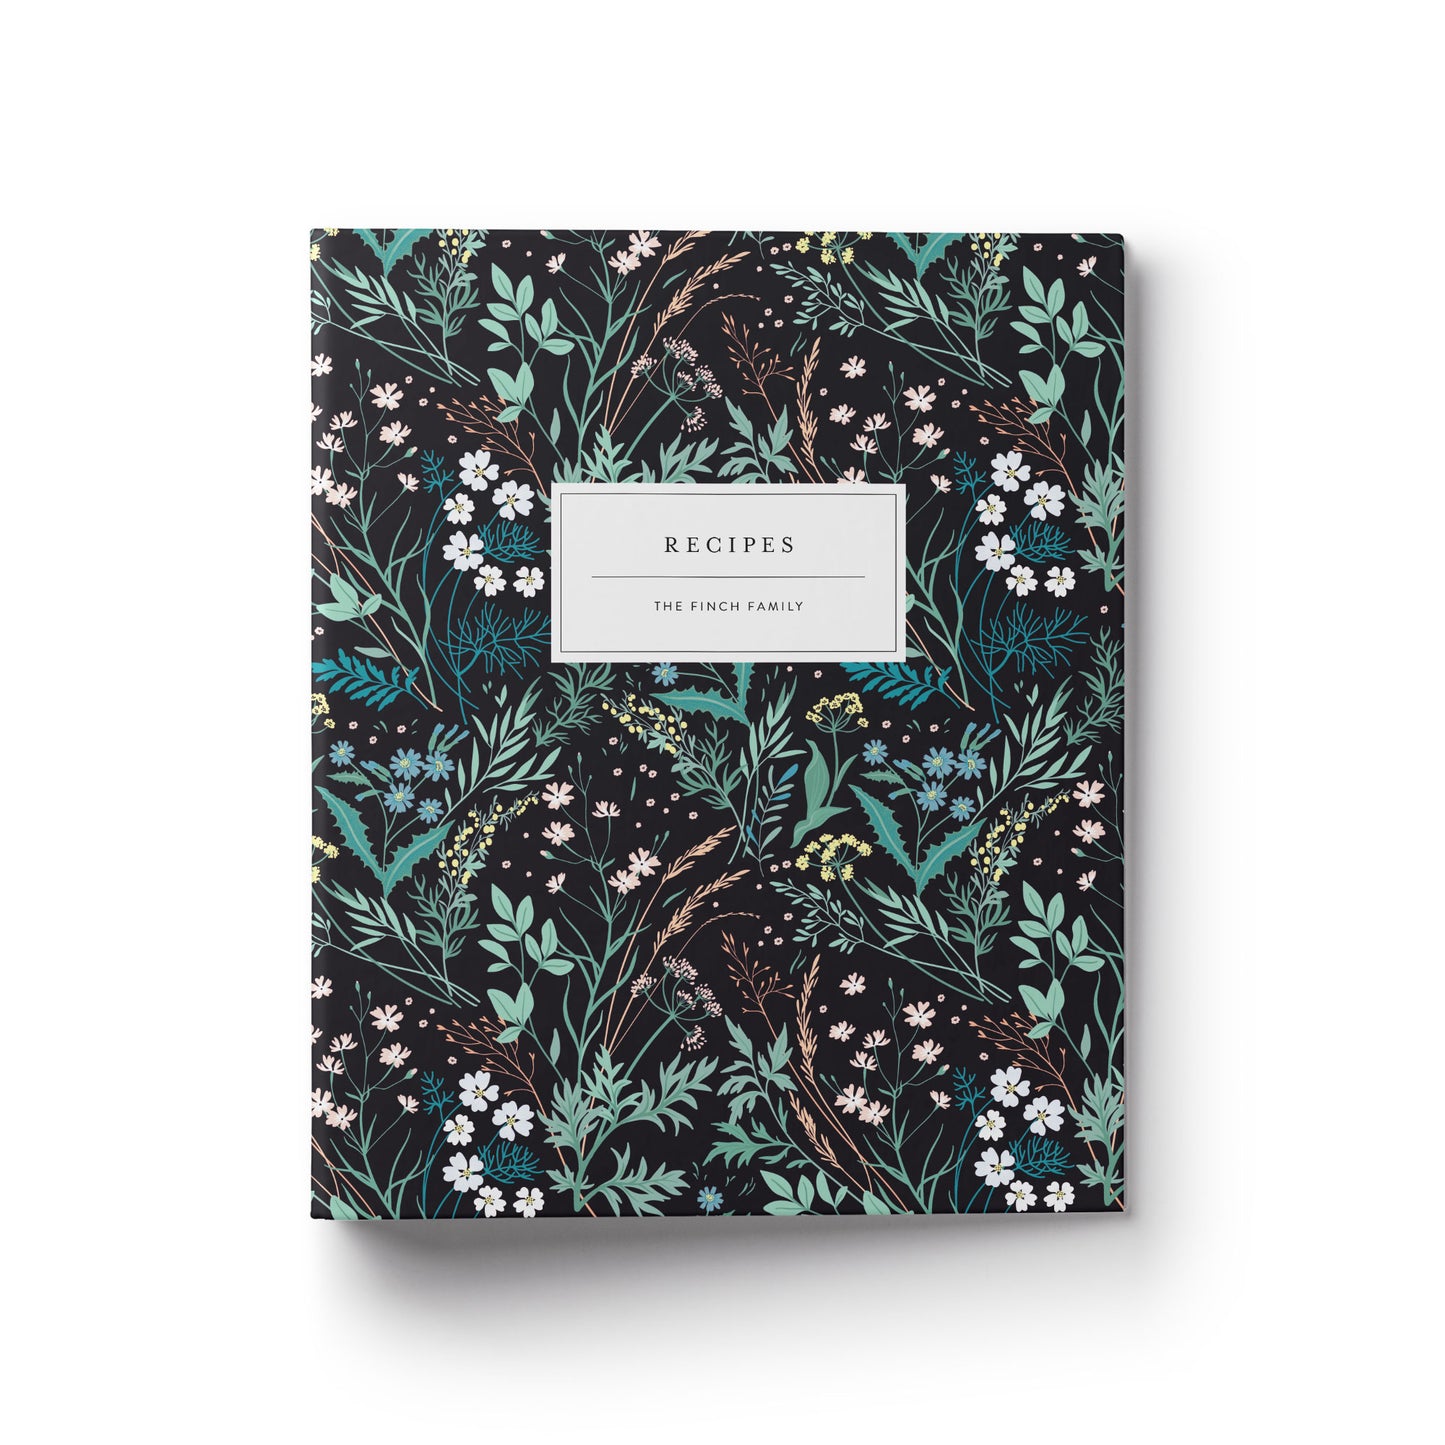 A wildflower custom recipe binder makes the perfect gift for any occasion